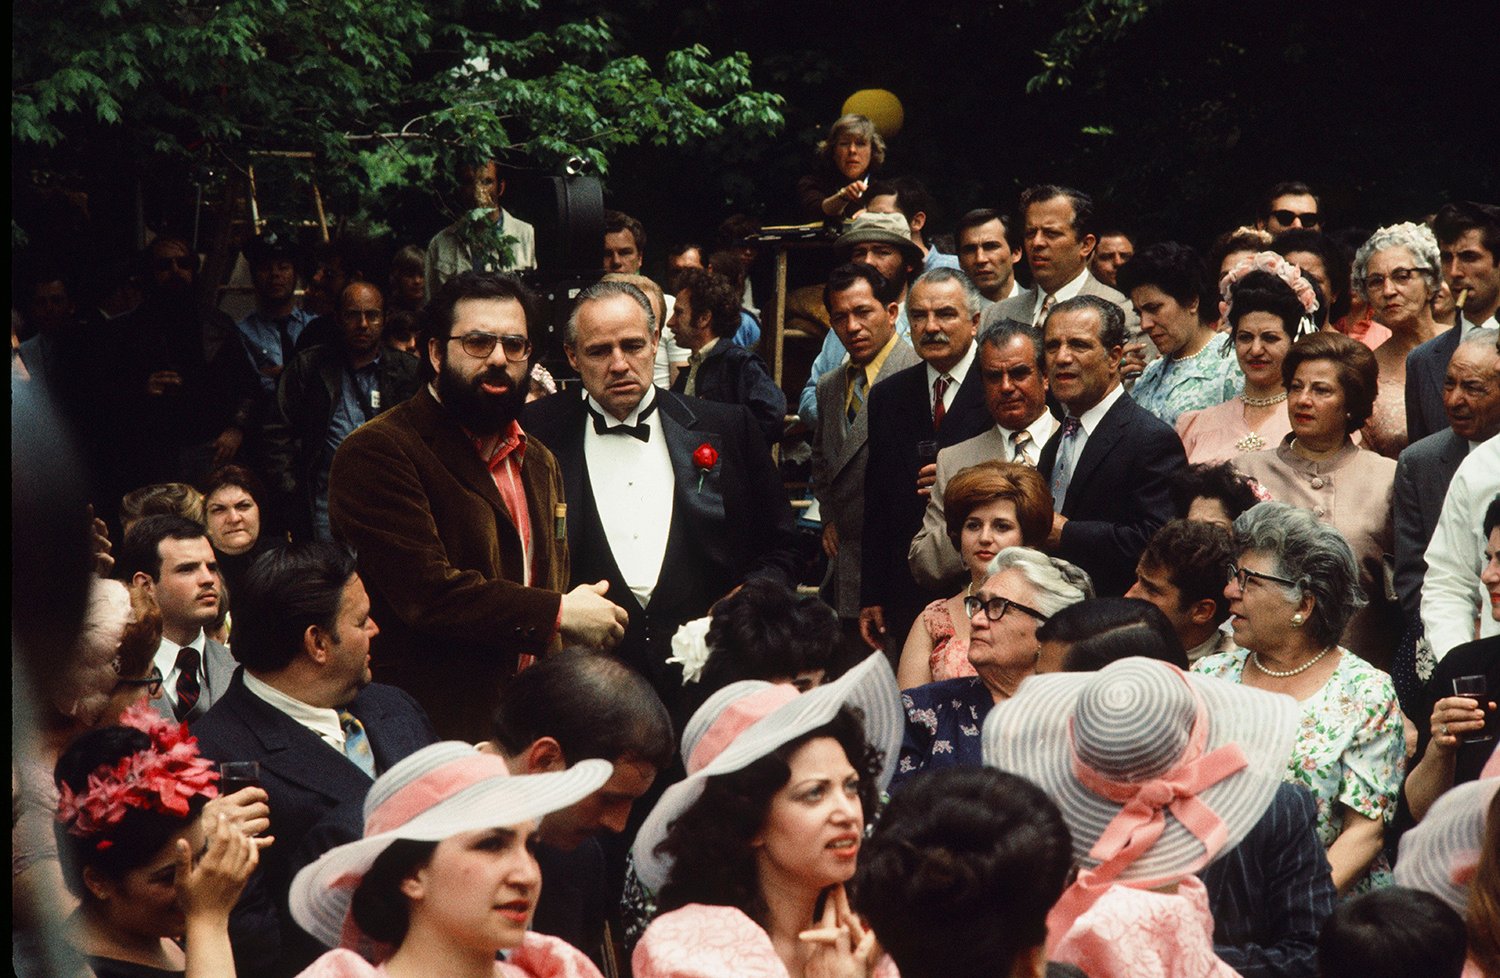 'The Godfather': Marlon Brando and director Francis Ford Coppola stand in the wedding crowd